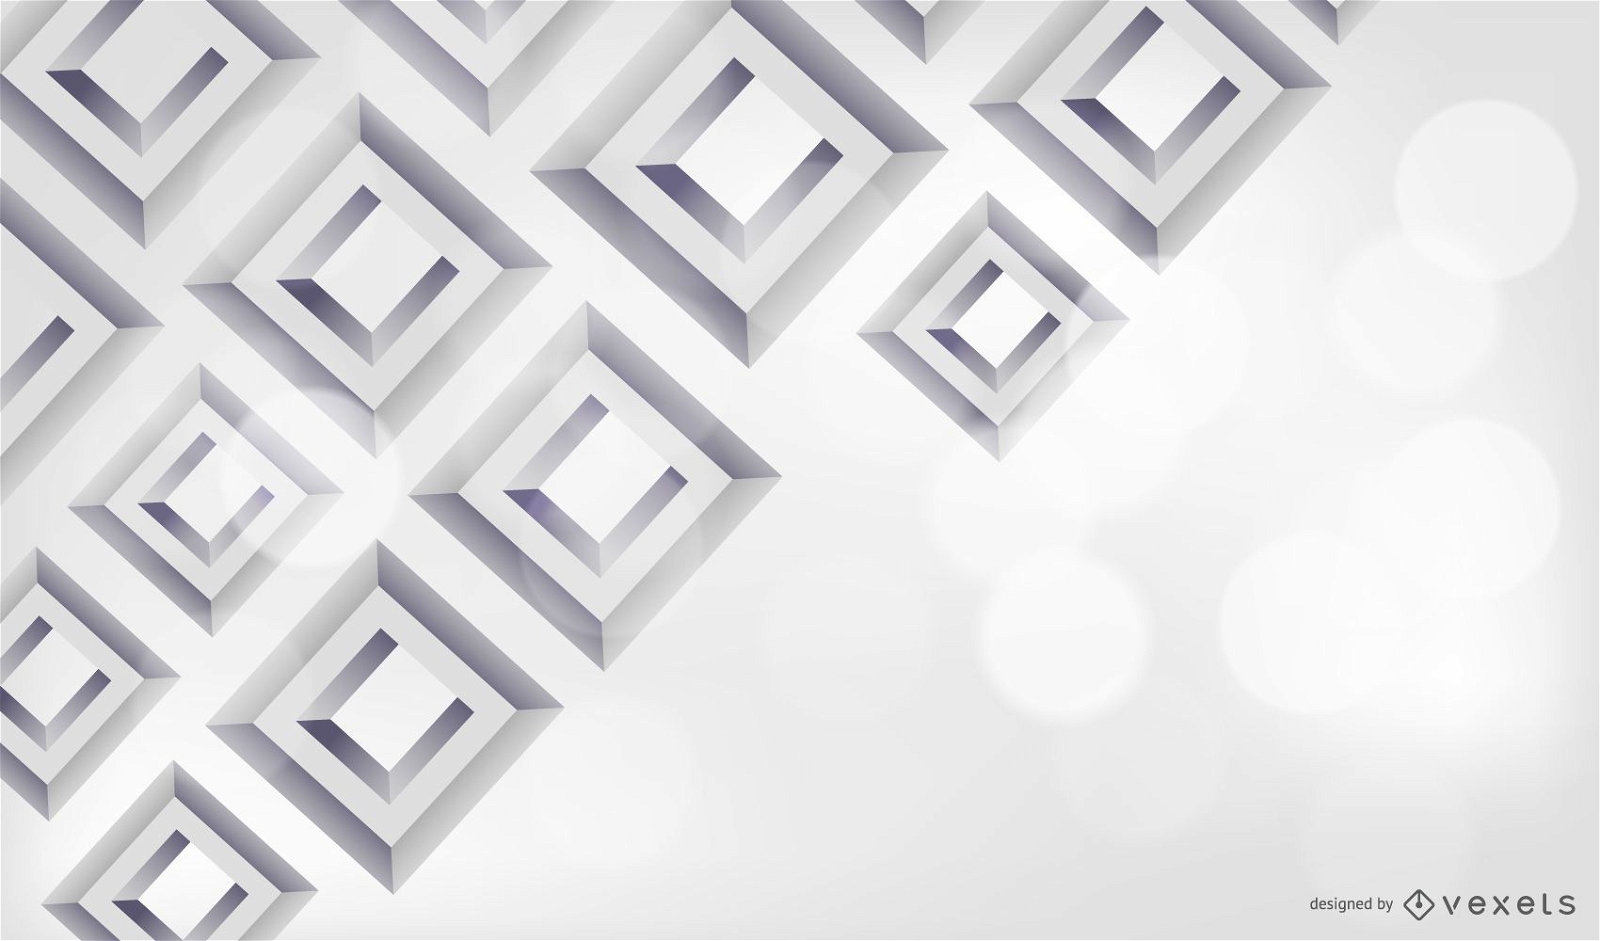 3D Diamond Square Grey Background Vector Download